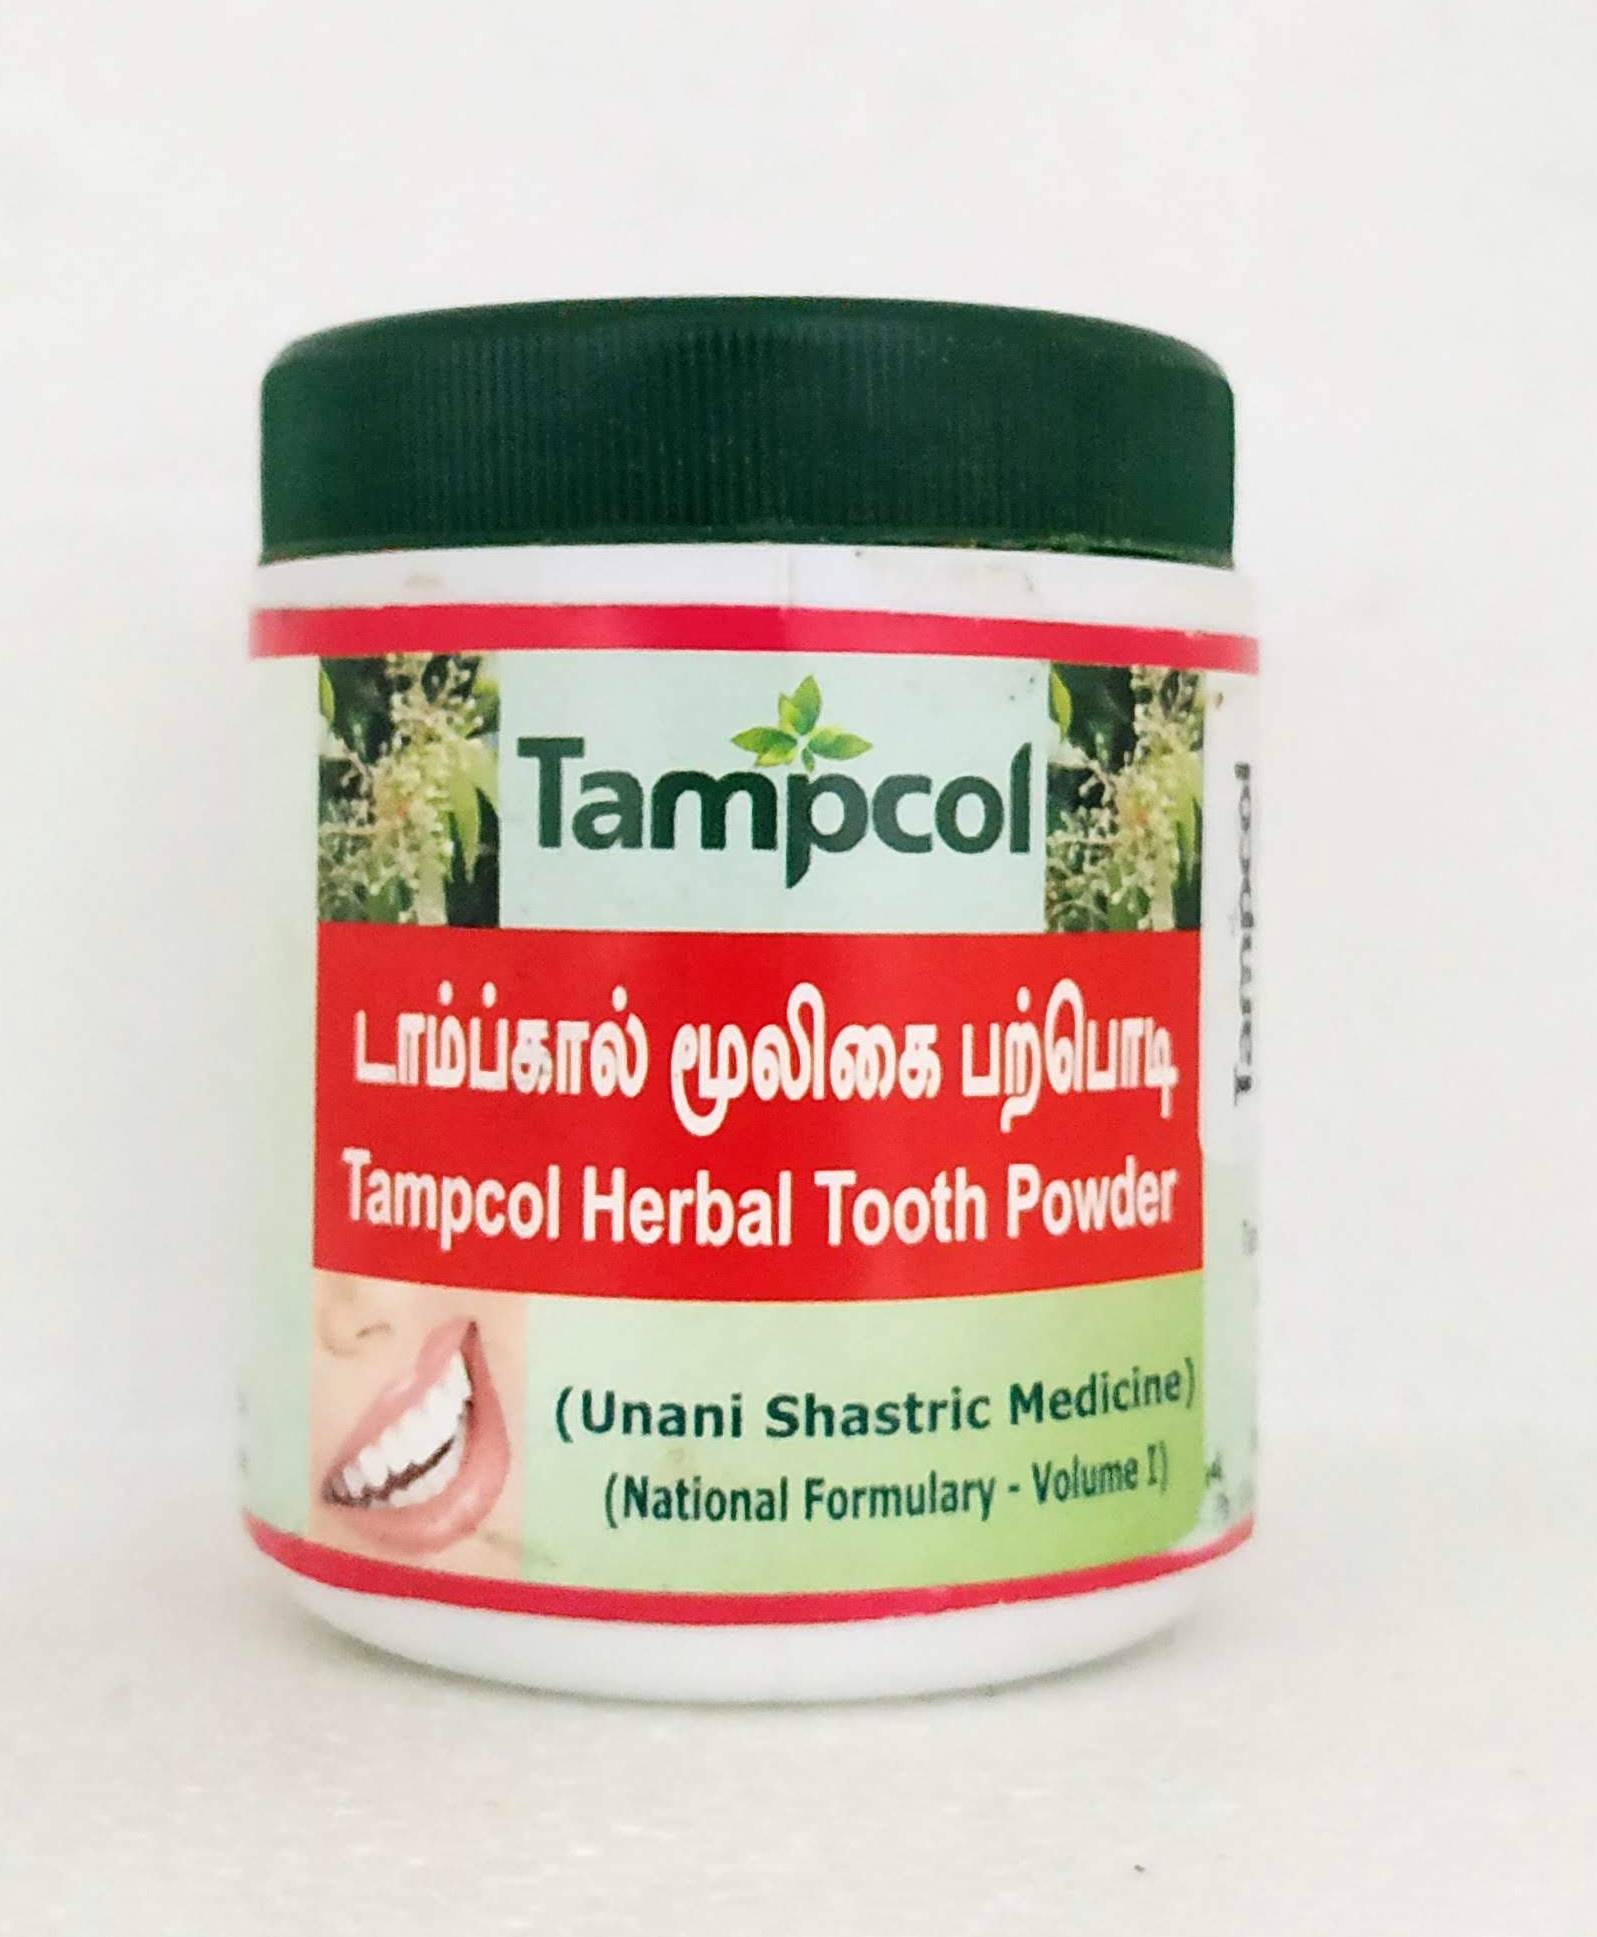 Shop Tampcol herbal toothpowder 100gm at price 46.50 from Tampcol Online - Ayush Care